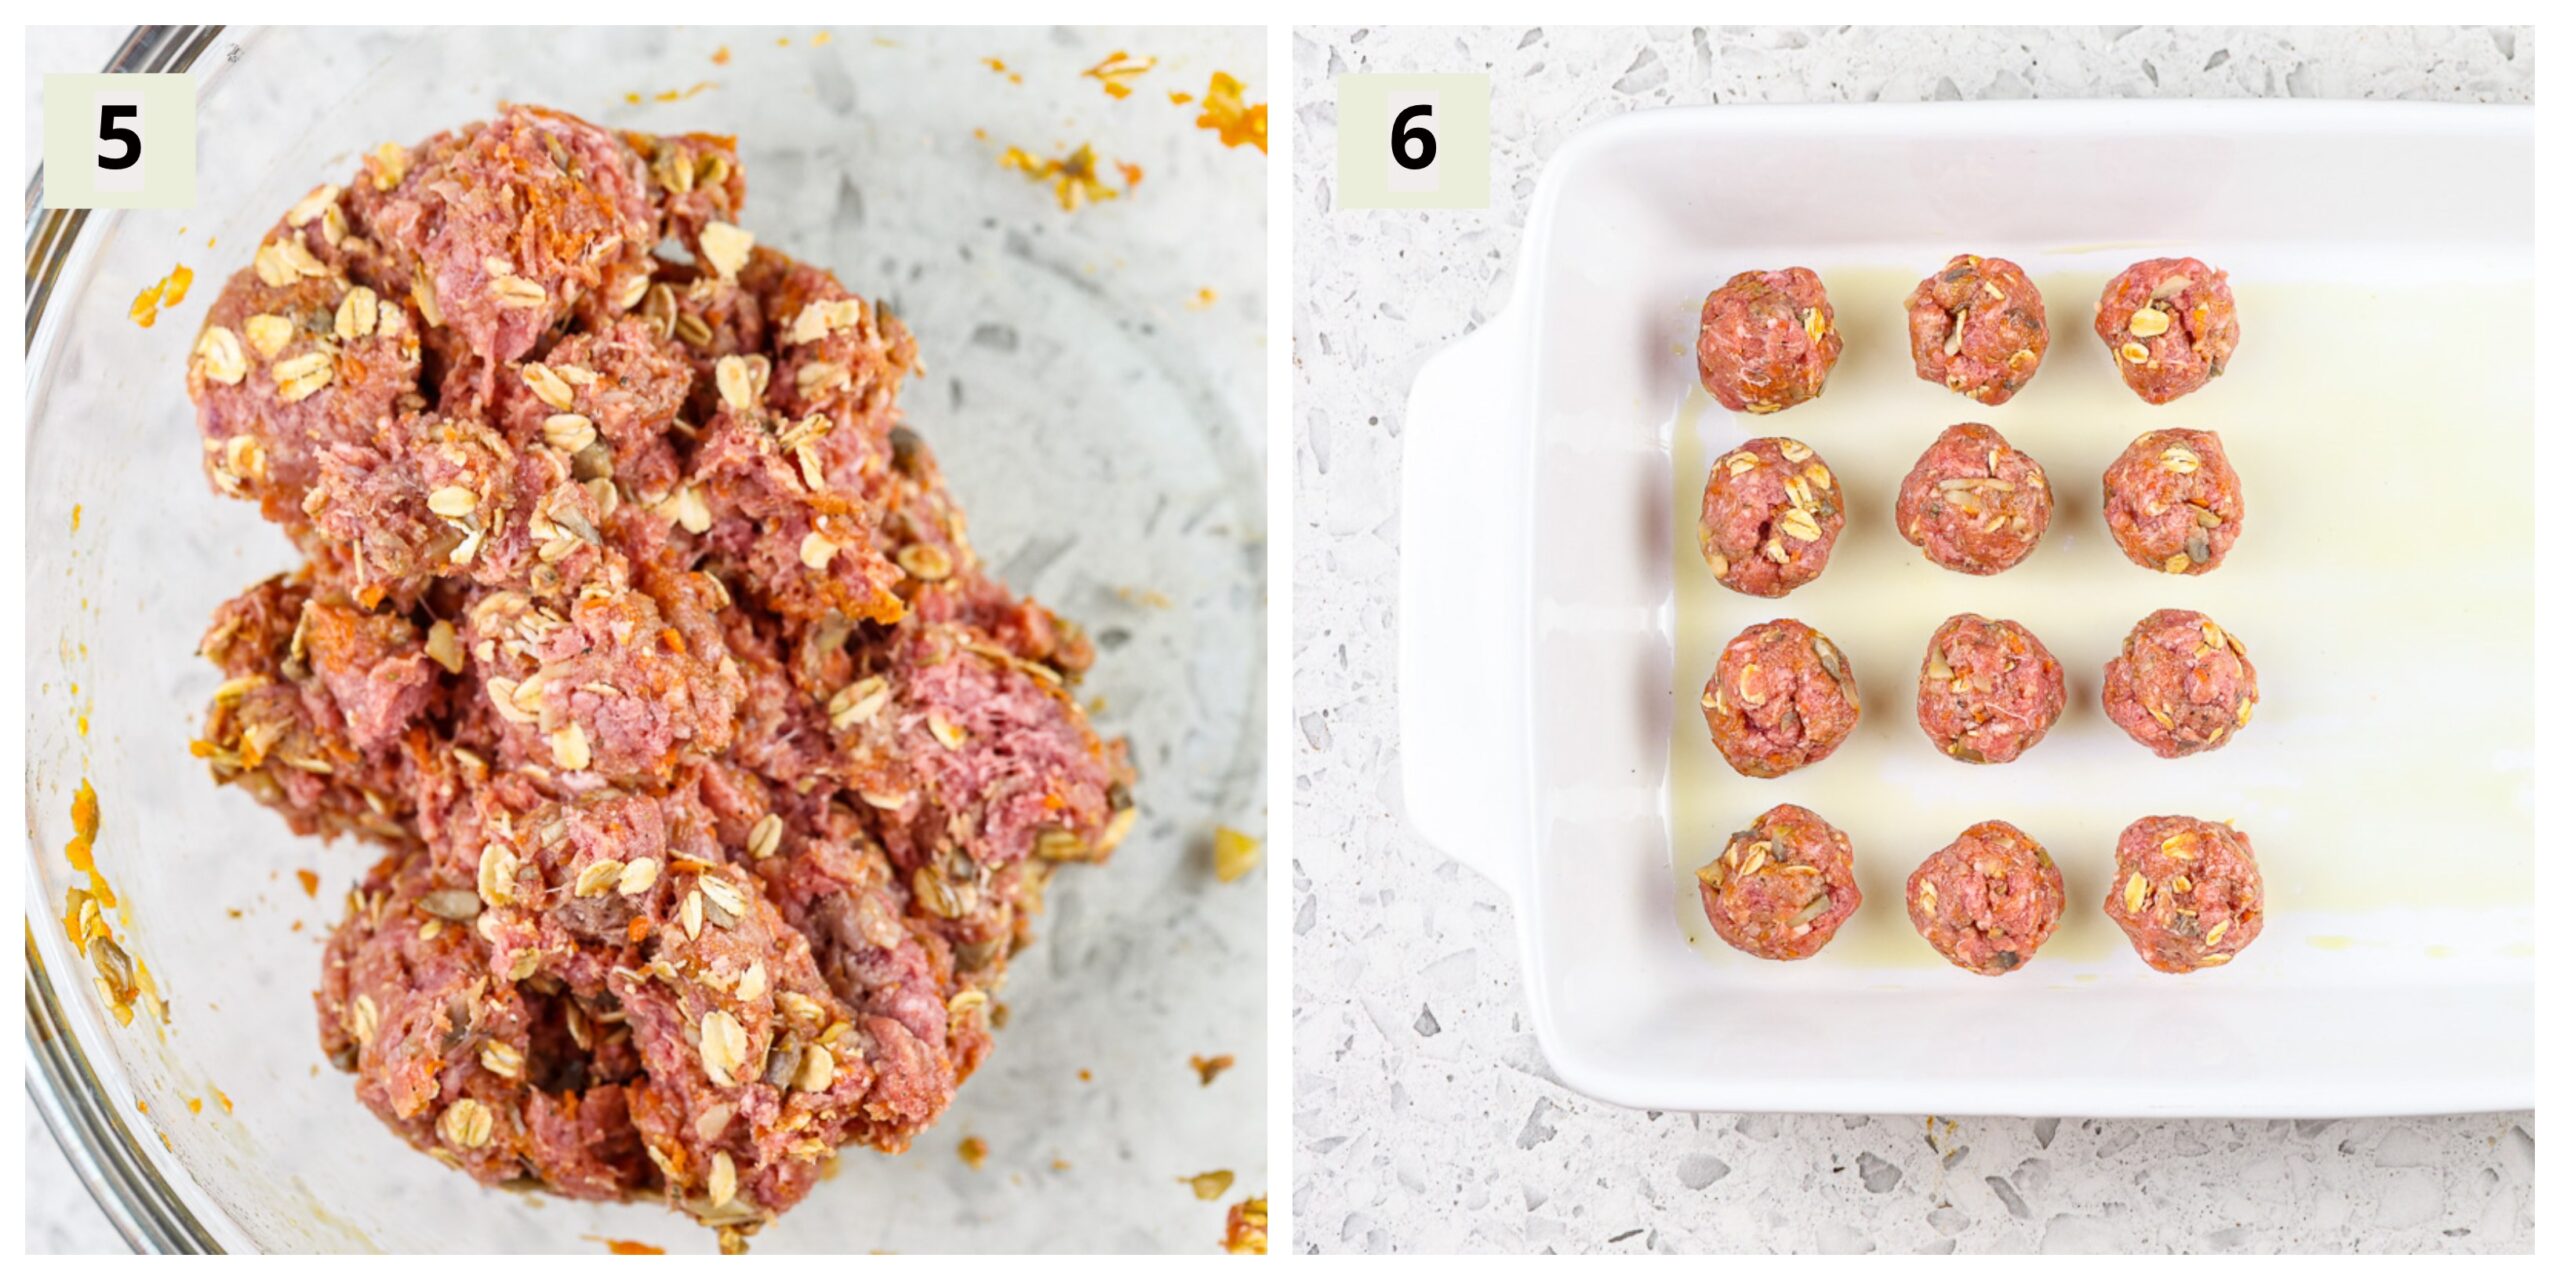 Two picture collage with first a glass bowl with raw beef baby meatballs, the second the raw meatballs formed into 1-ounce balls in a white casserole dish.